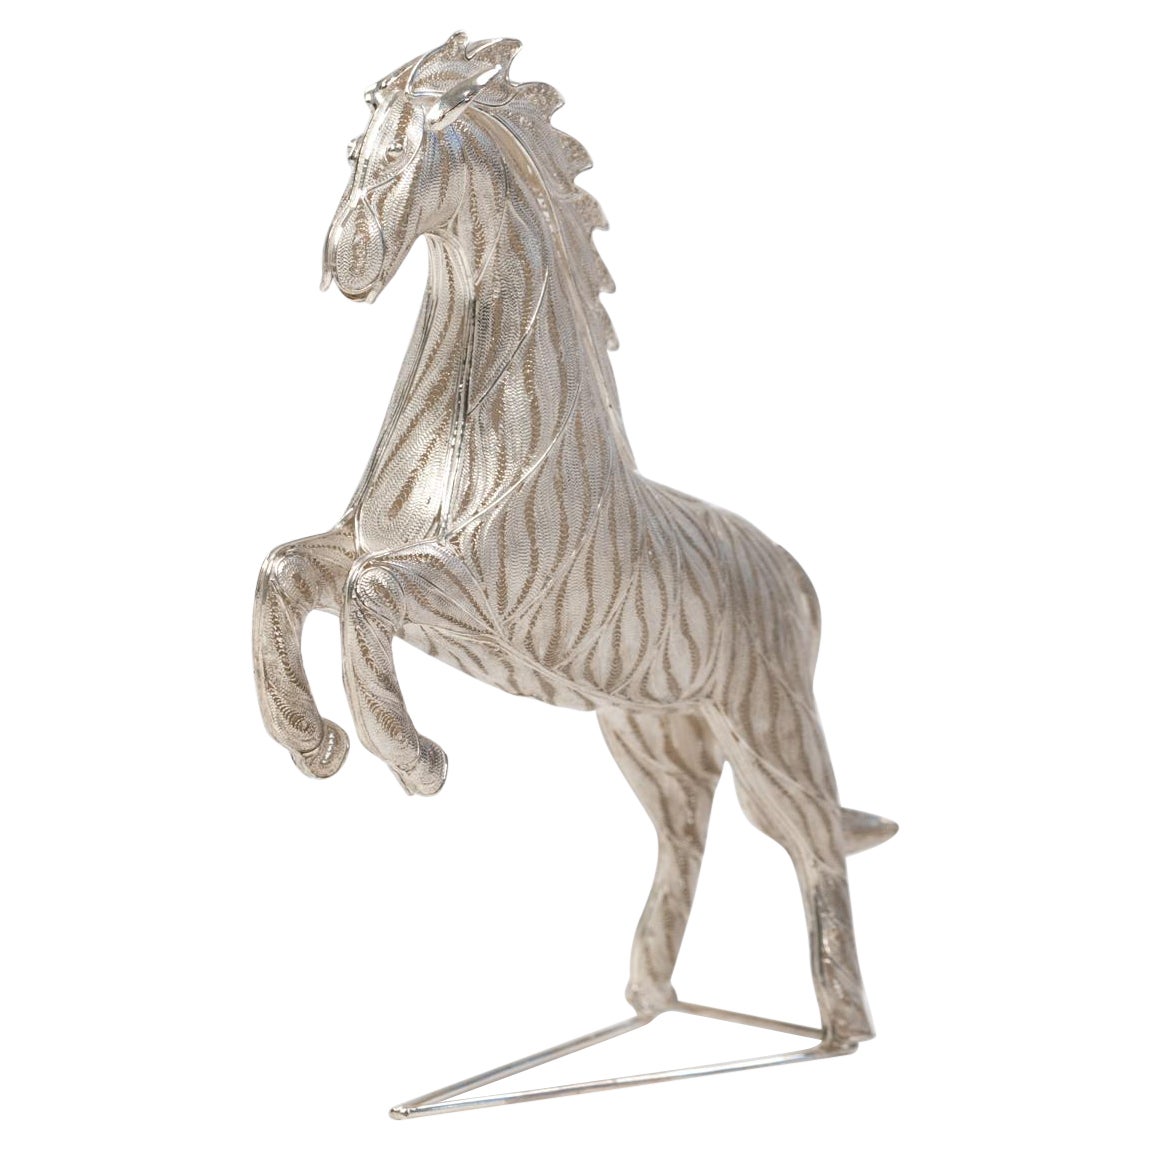 Jumping Horse Sculpture 925 Silver Handcrafted Filigree Technique Germany 2005 For Sale